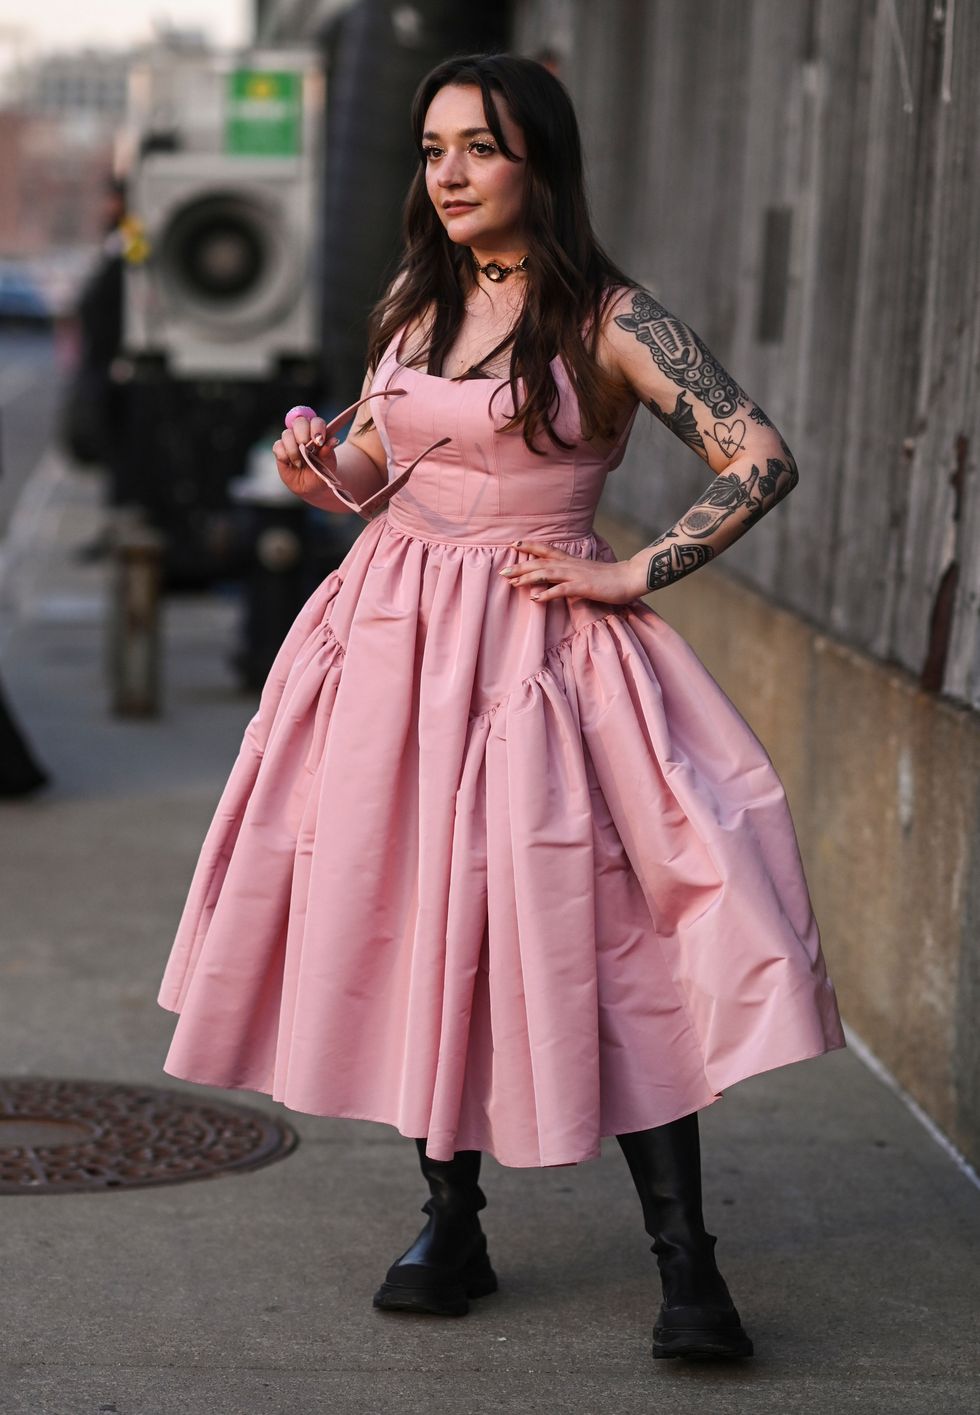 new york, new york march 15 mandy lee is seen wearing a pink alexander mcqueen dress outside the alexander mcqueen aw22 show on march 15, 2022 in the borough of brooklyn, new york photo by daniel zuchnikgetty images